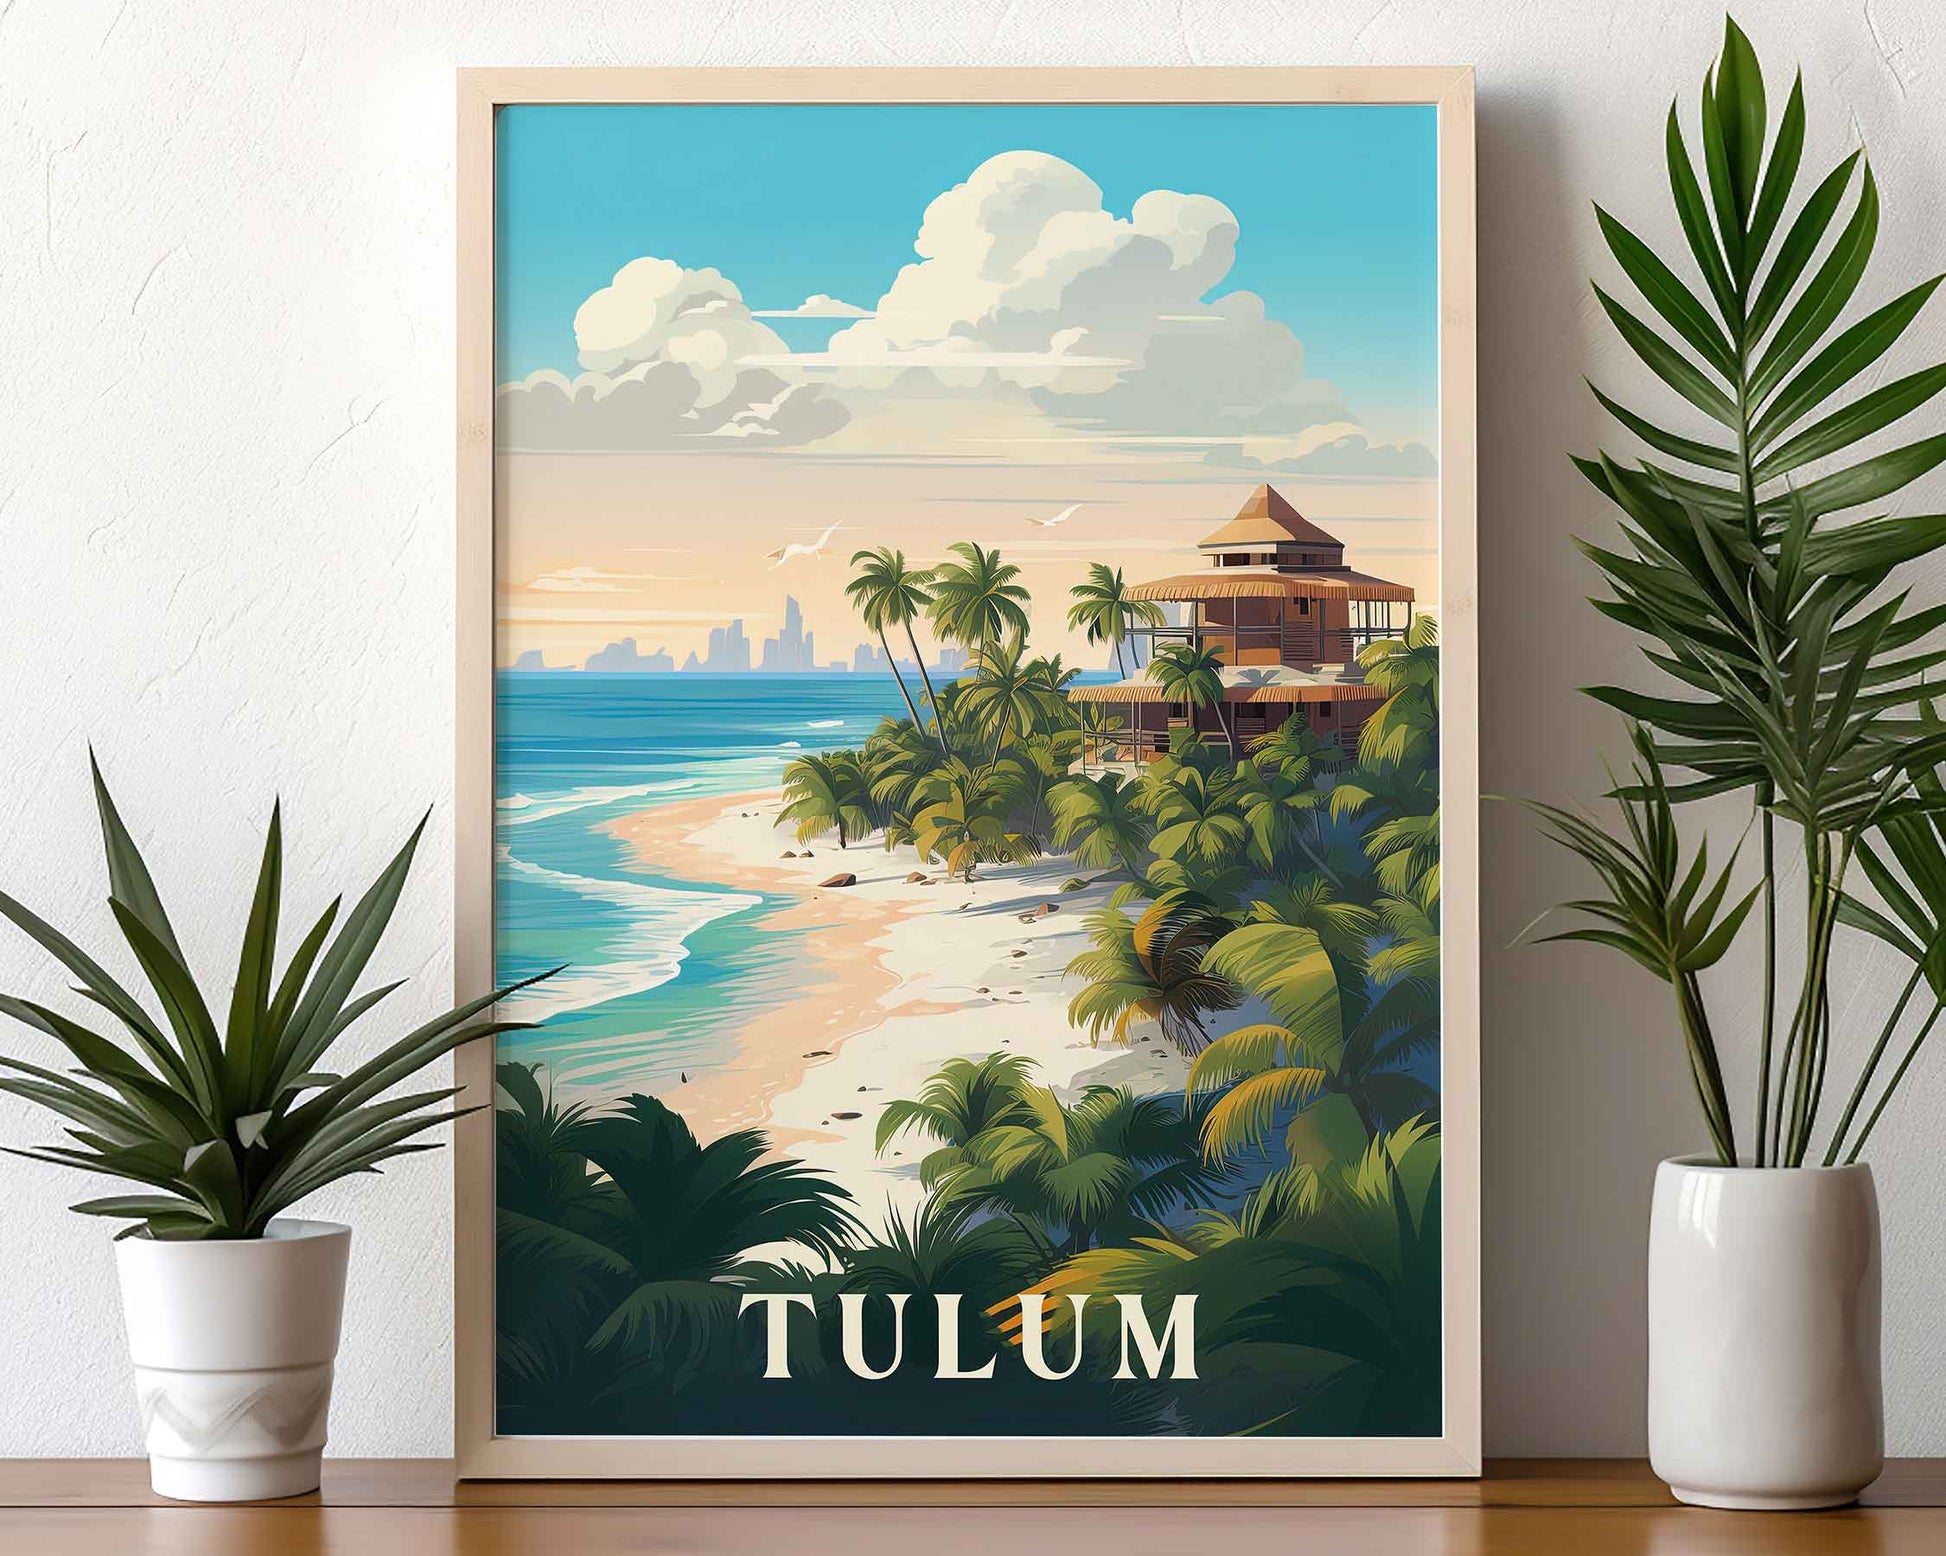 Framed Image of Tulum Mexico Wall Art Travel Poster Print Tourism Illustration